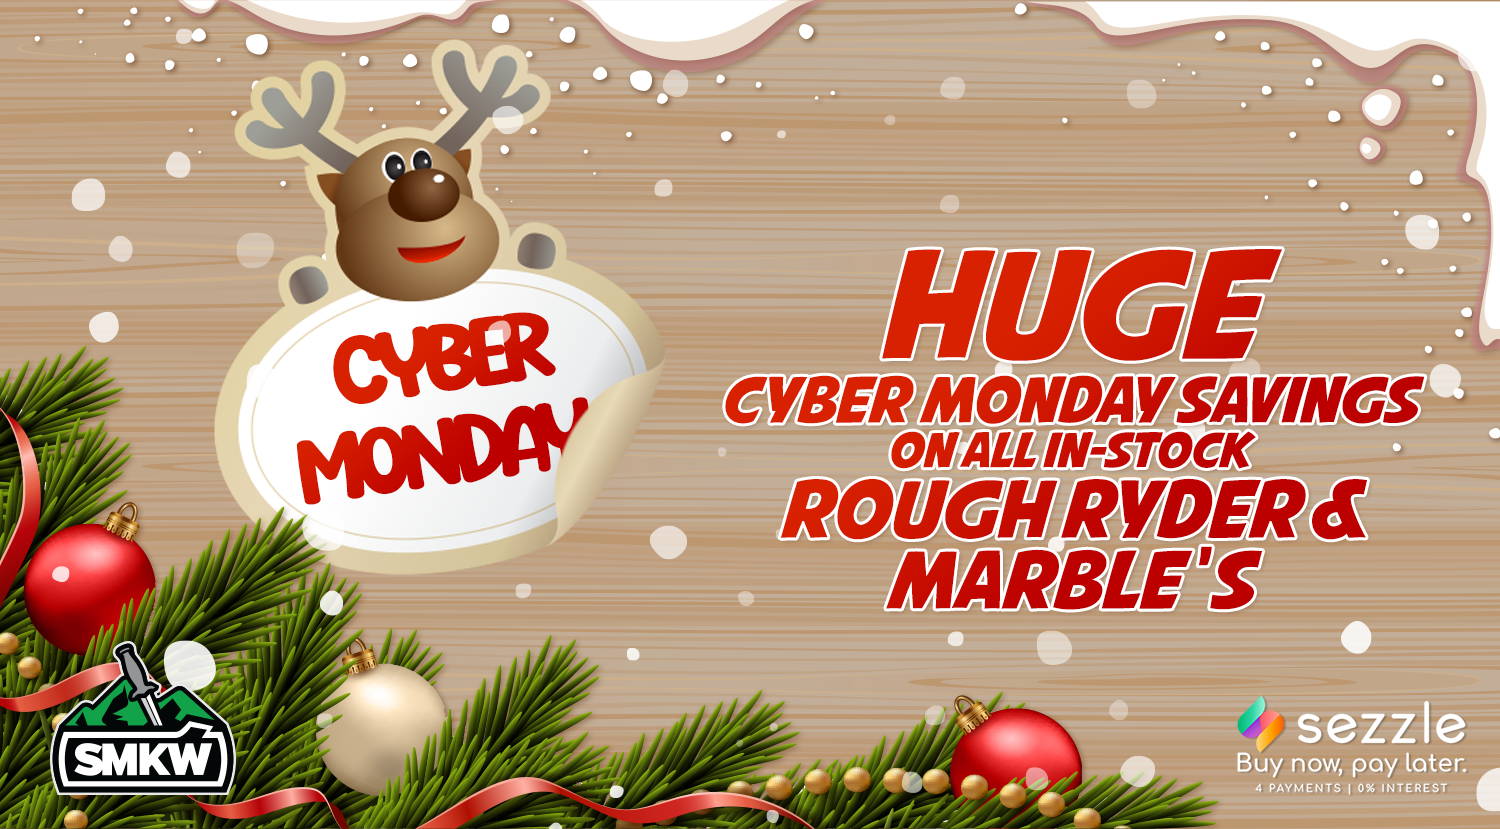 Huge Cyber Monday Saving On Rough Ryder and Marbles